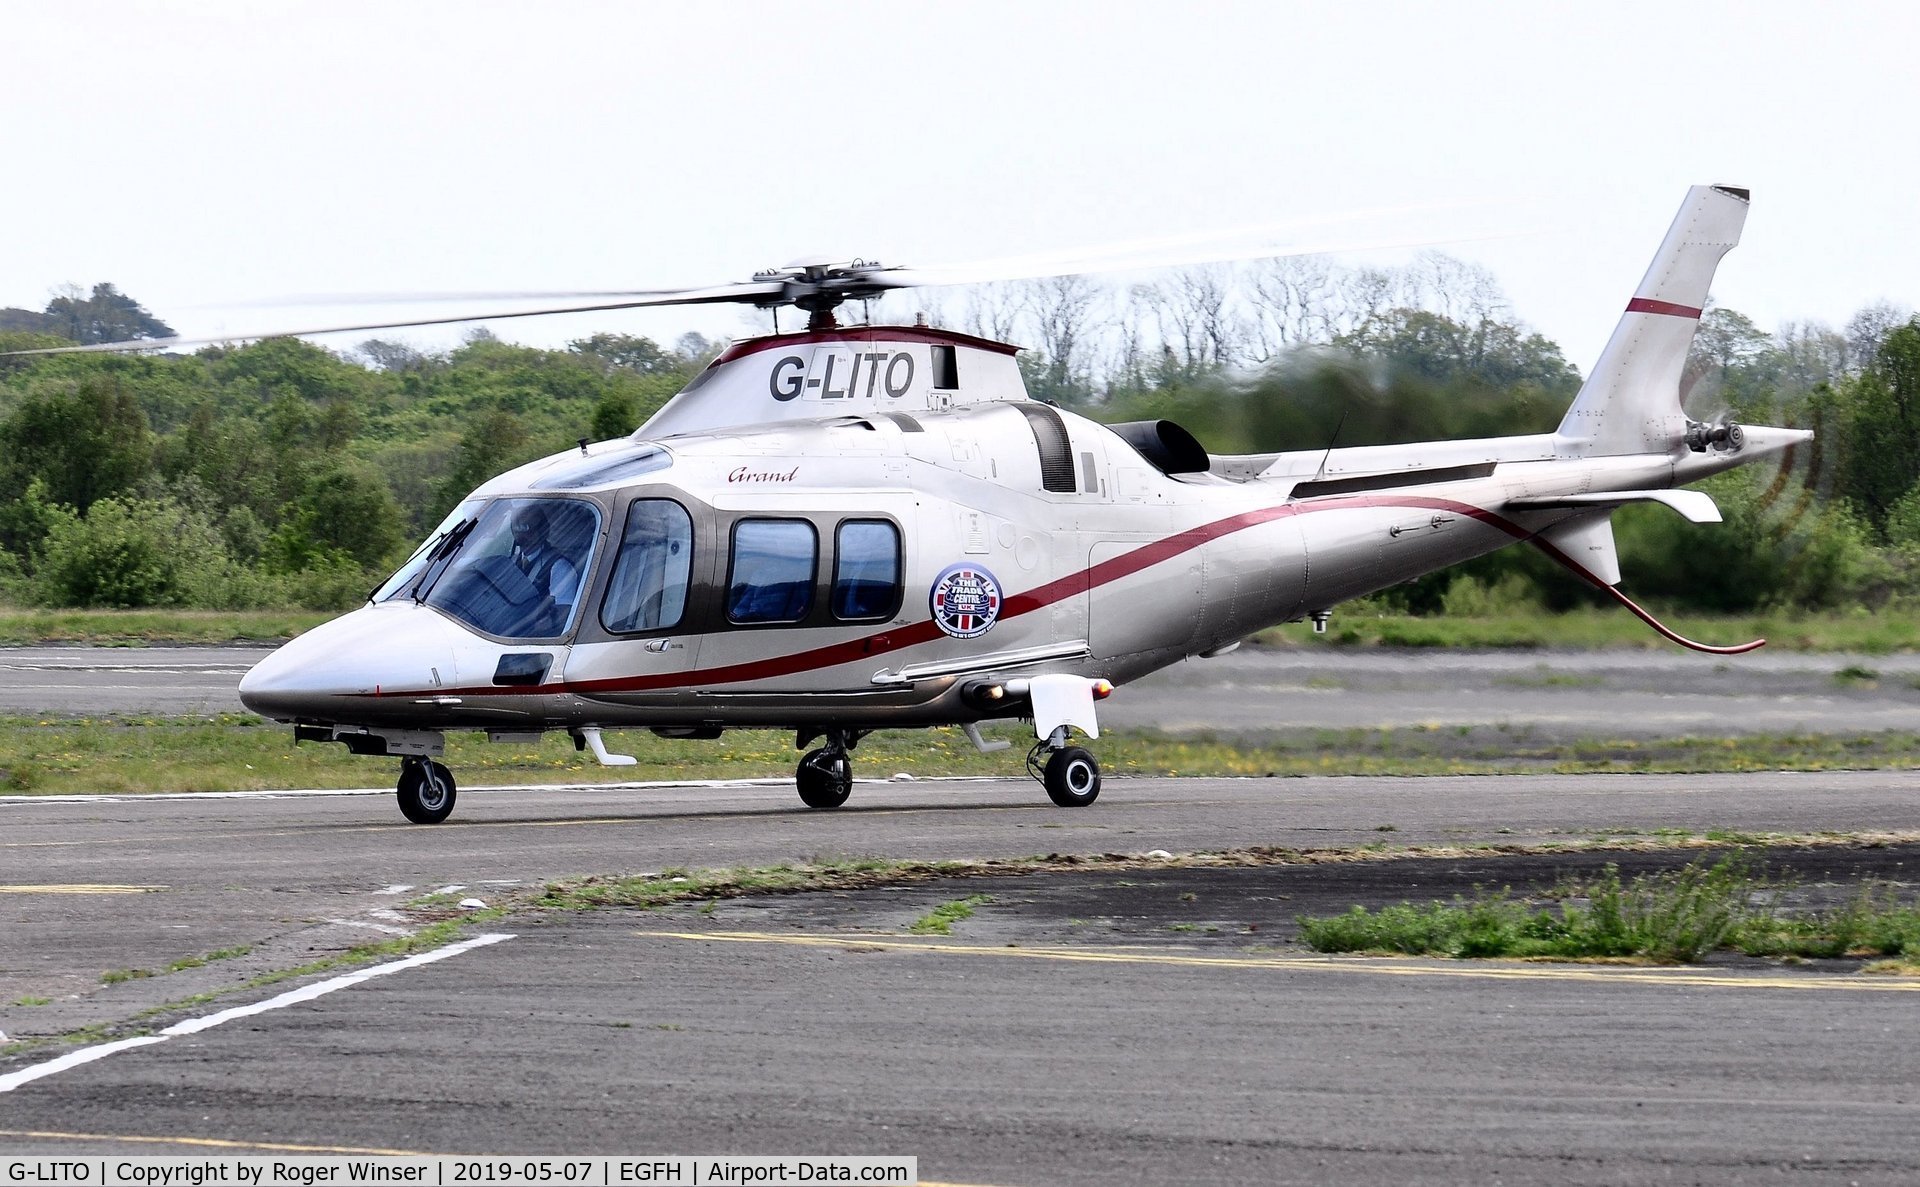 G-LITO, 2006 Agusta A109S Grand C/N 22015, Visiting A-109S Grand operated by Castle Air.